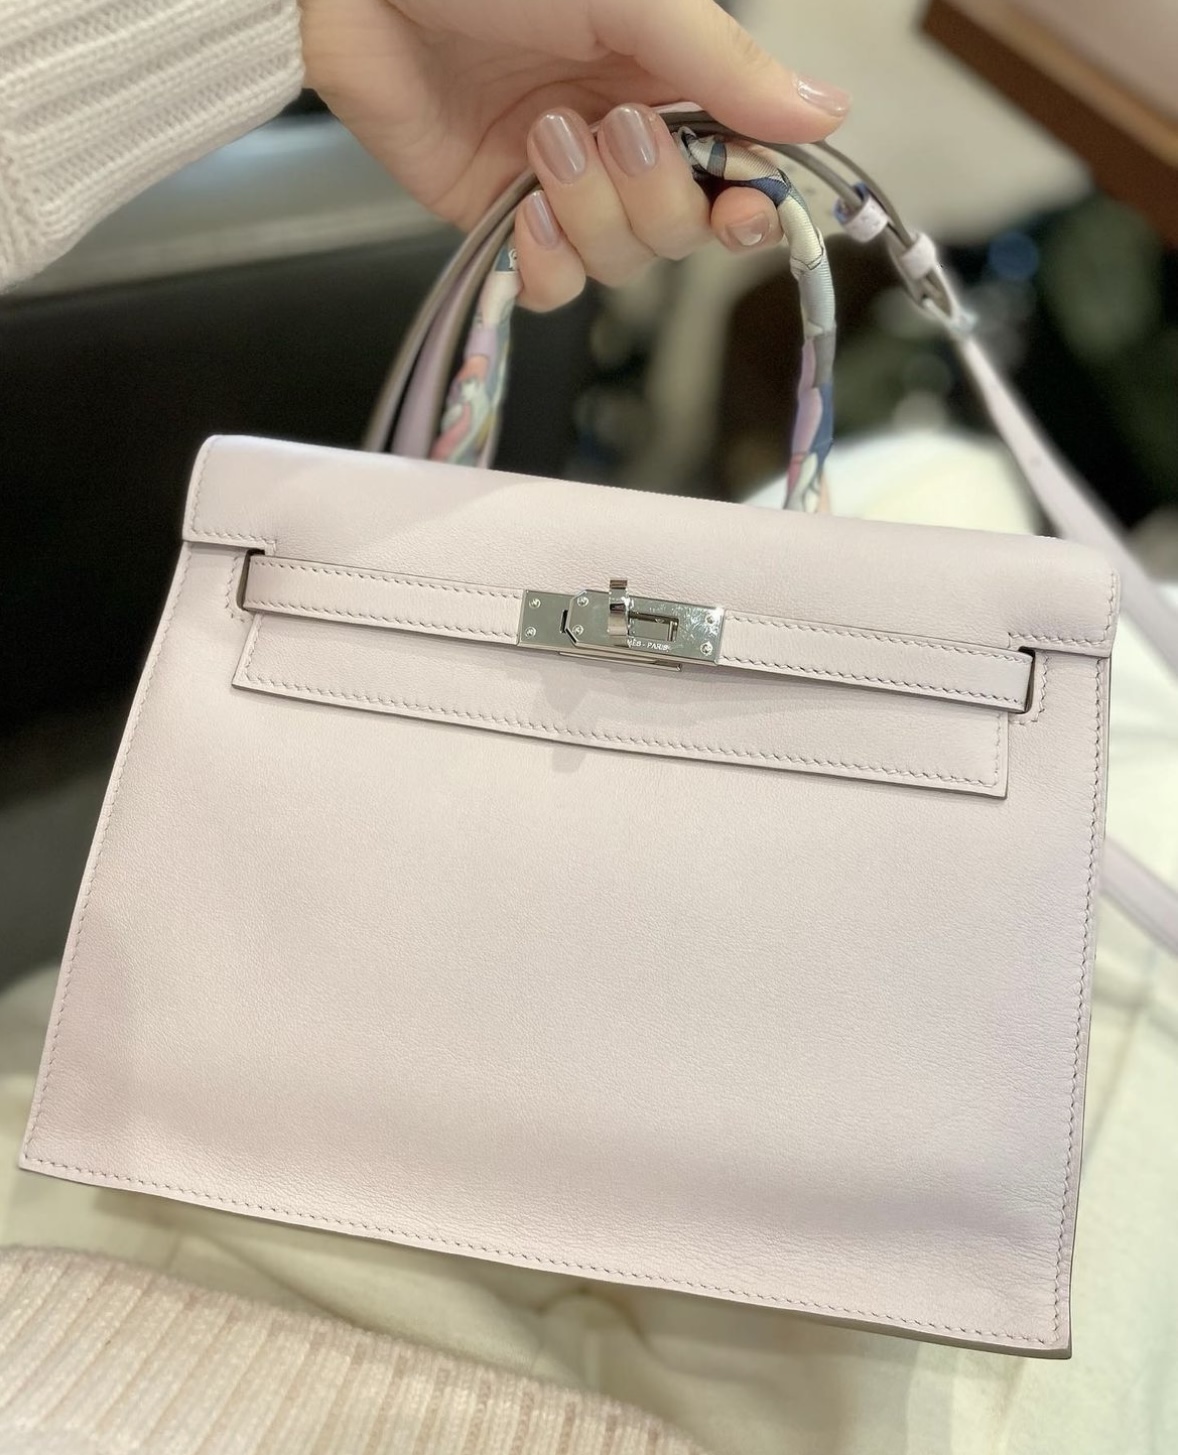 The Hermes Kelly Bag – Sizes and General Tips | Feather Factor